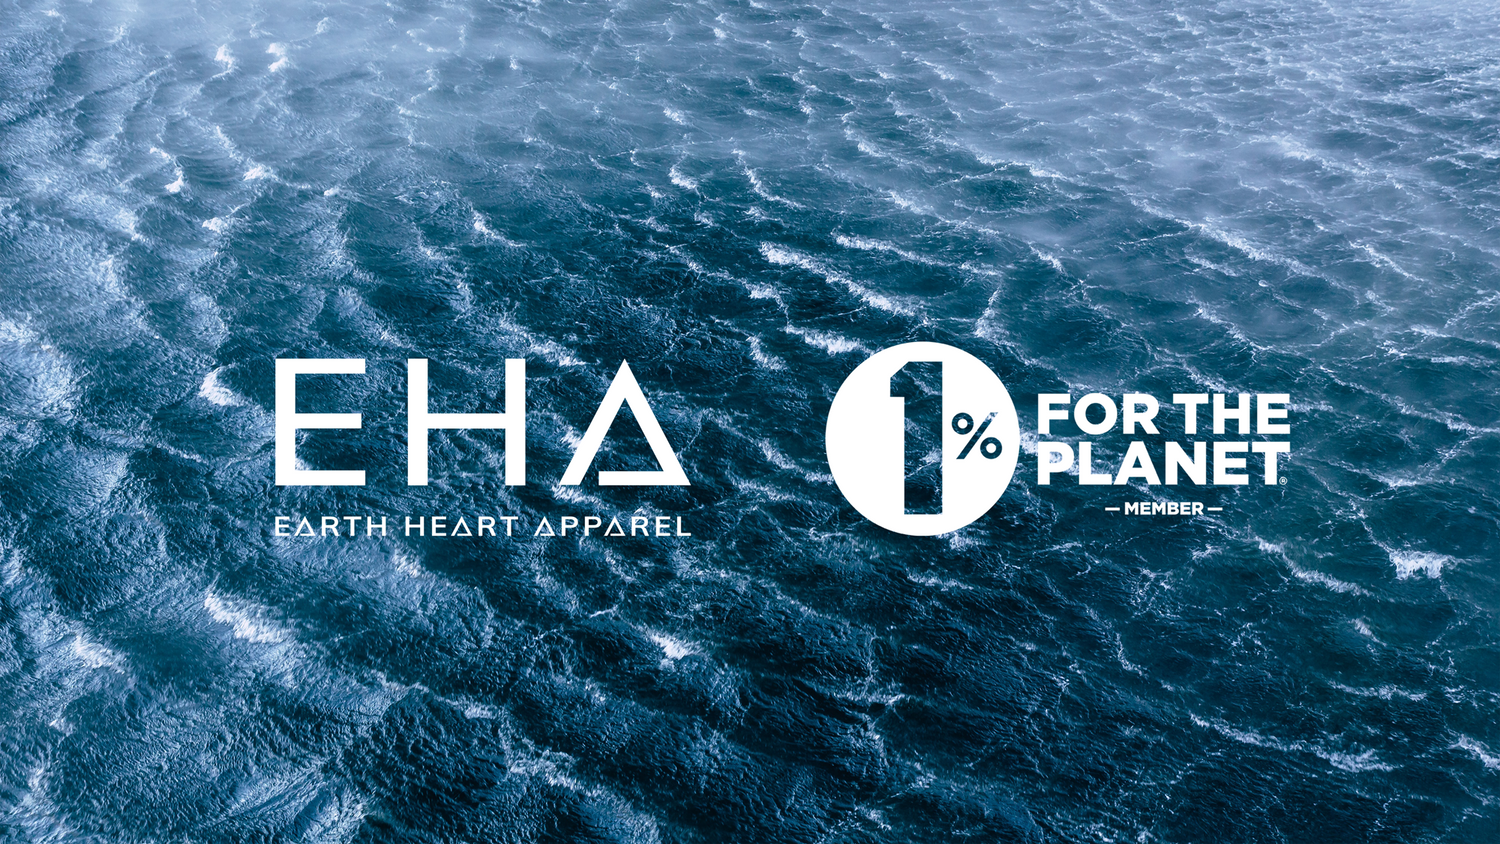 EHA/Earth Heart Apparel and 1% For The Planet logos